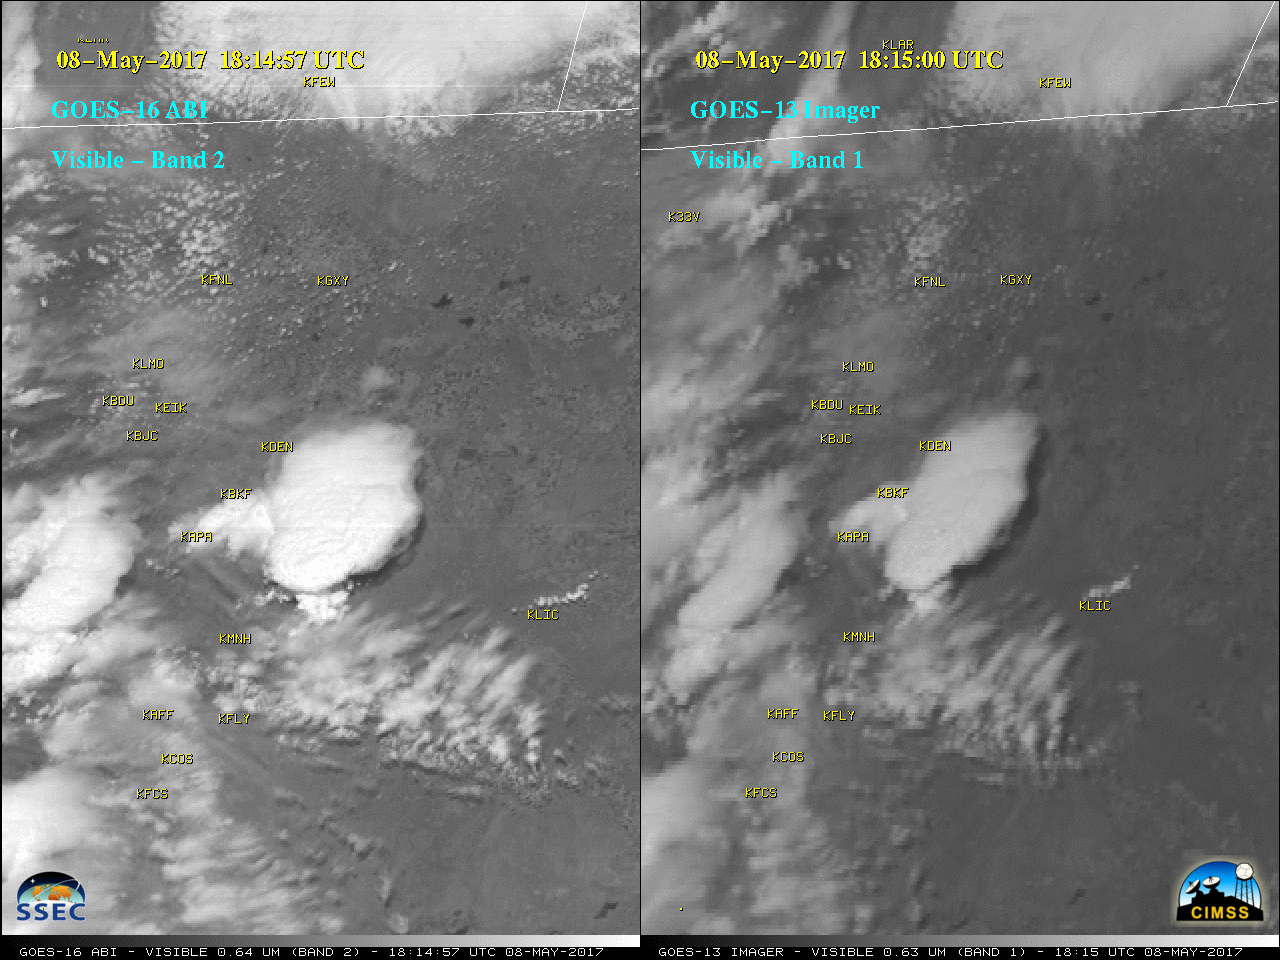 GOES-16 Visible (0.64 µm, left) and GOES-13 Visible (0.63 µm, right) images, with surface station identifiers in yellow [click to play animation | MP4]